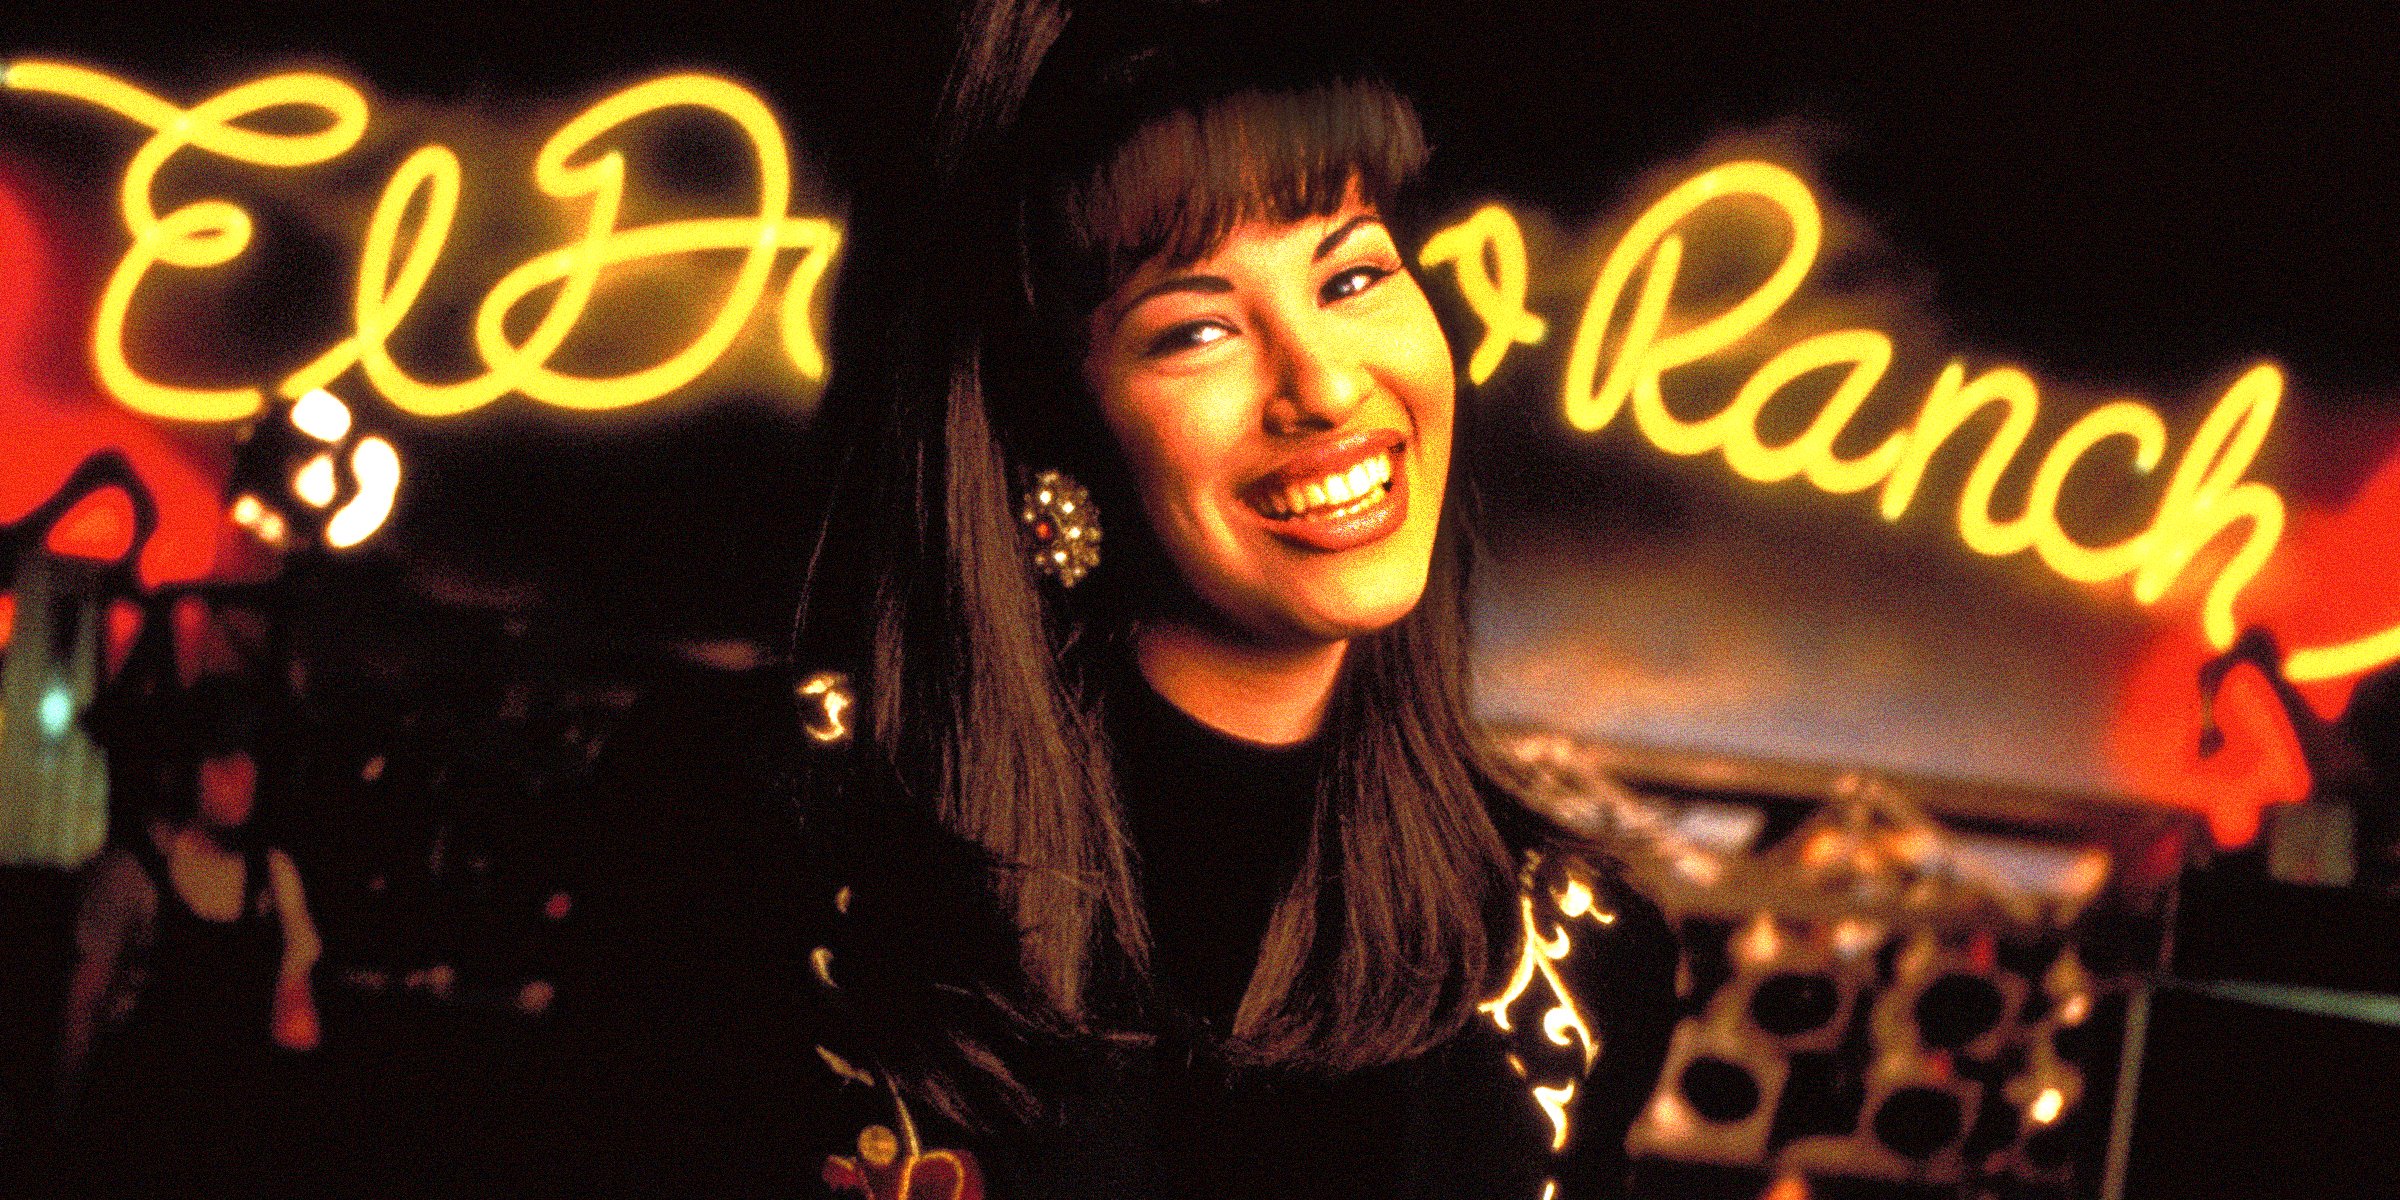 Selena Quintanilla | Source: Getty Images